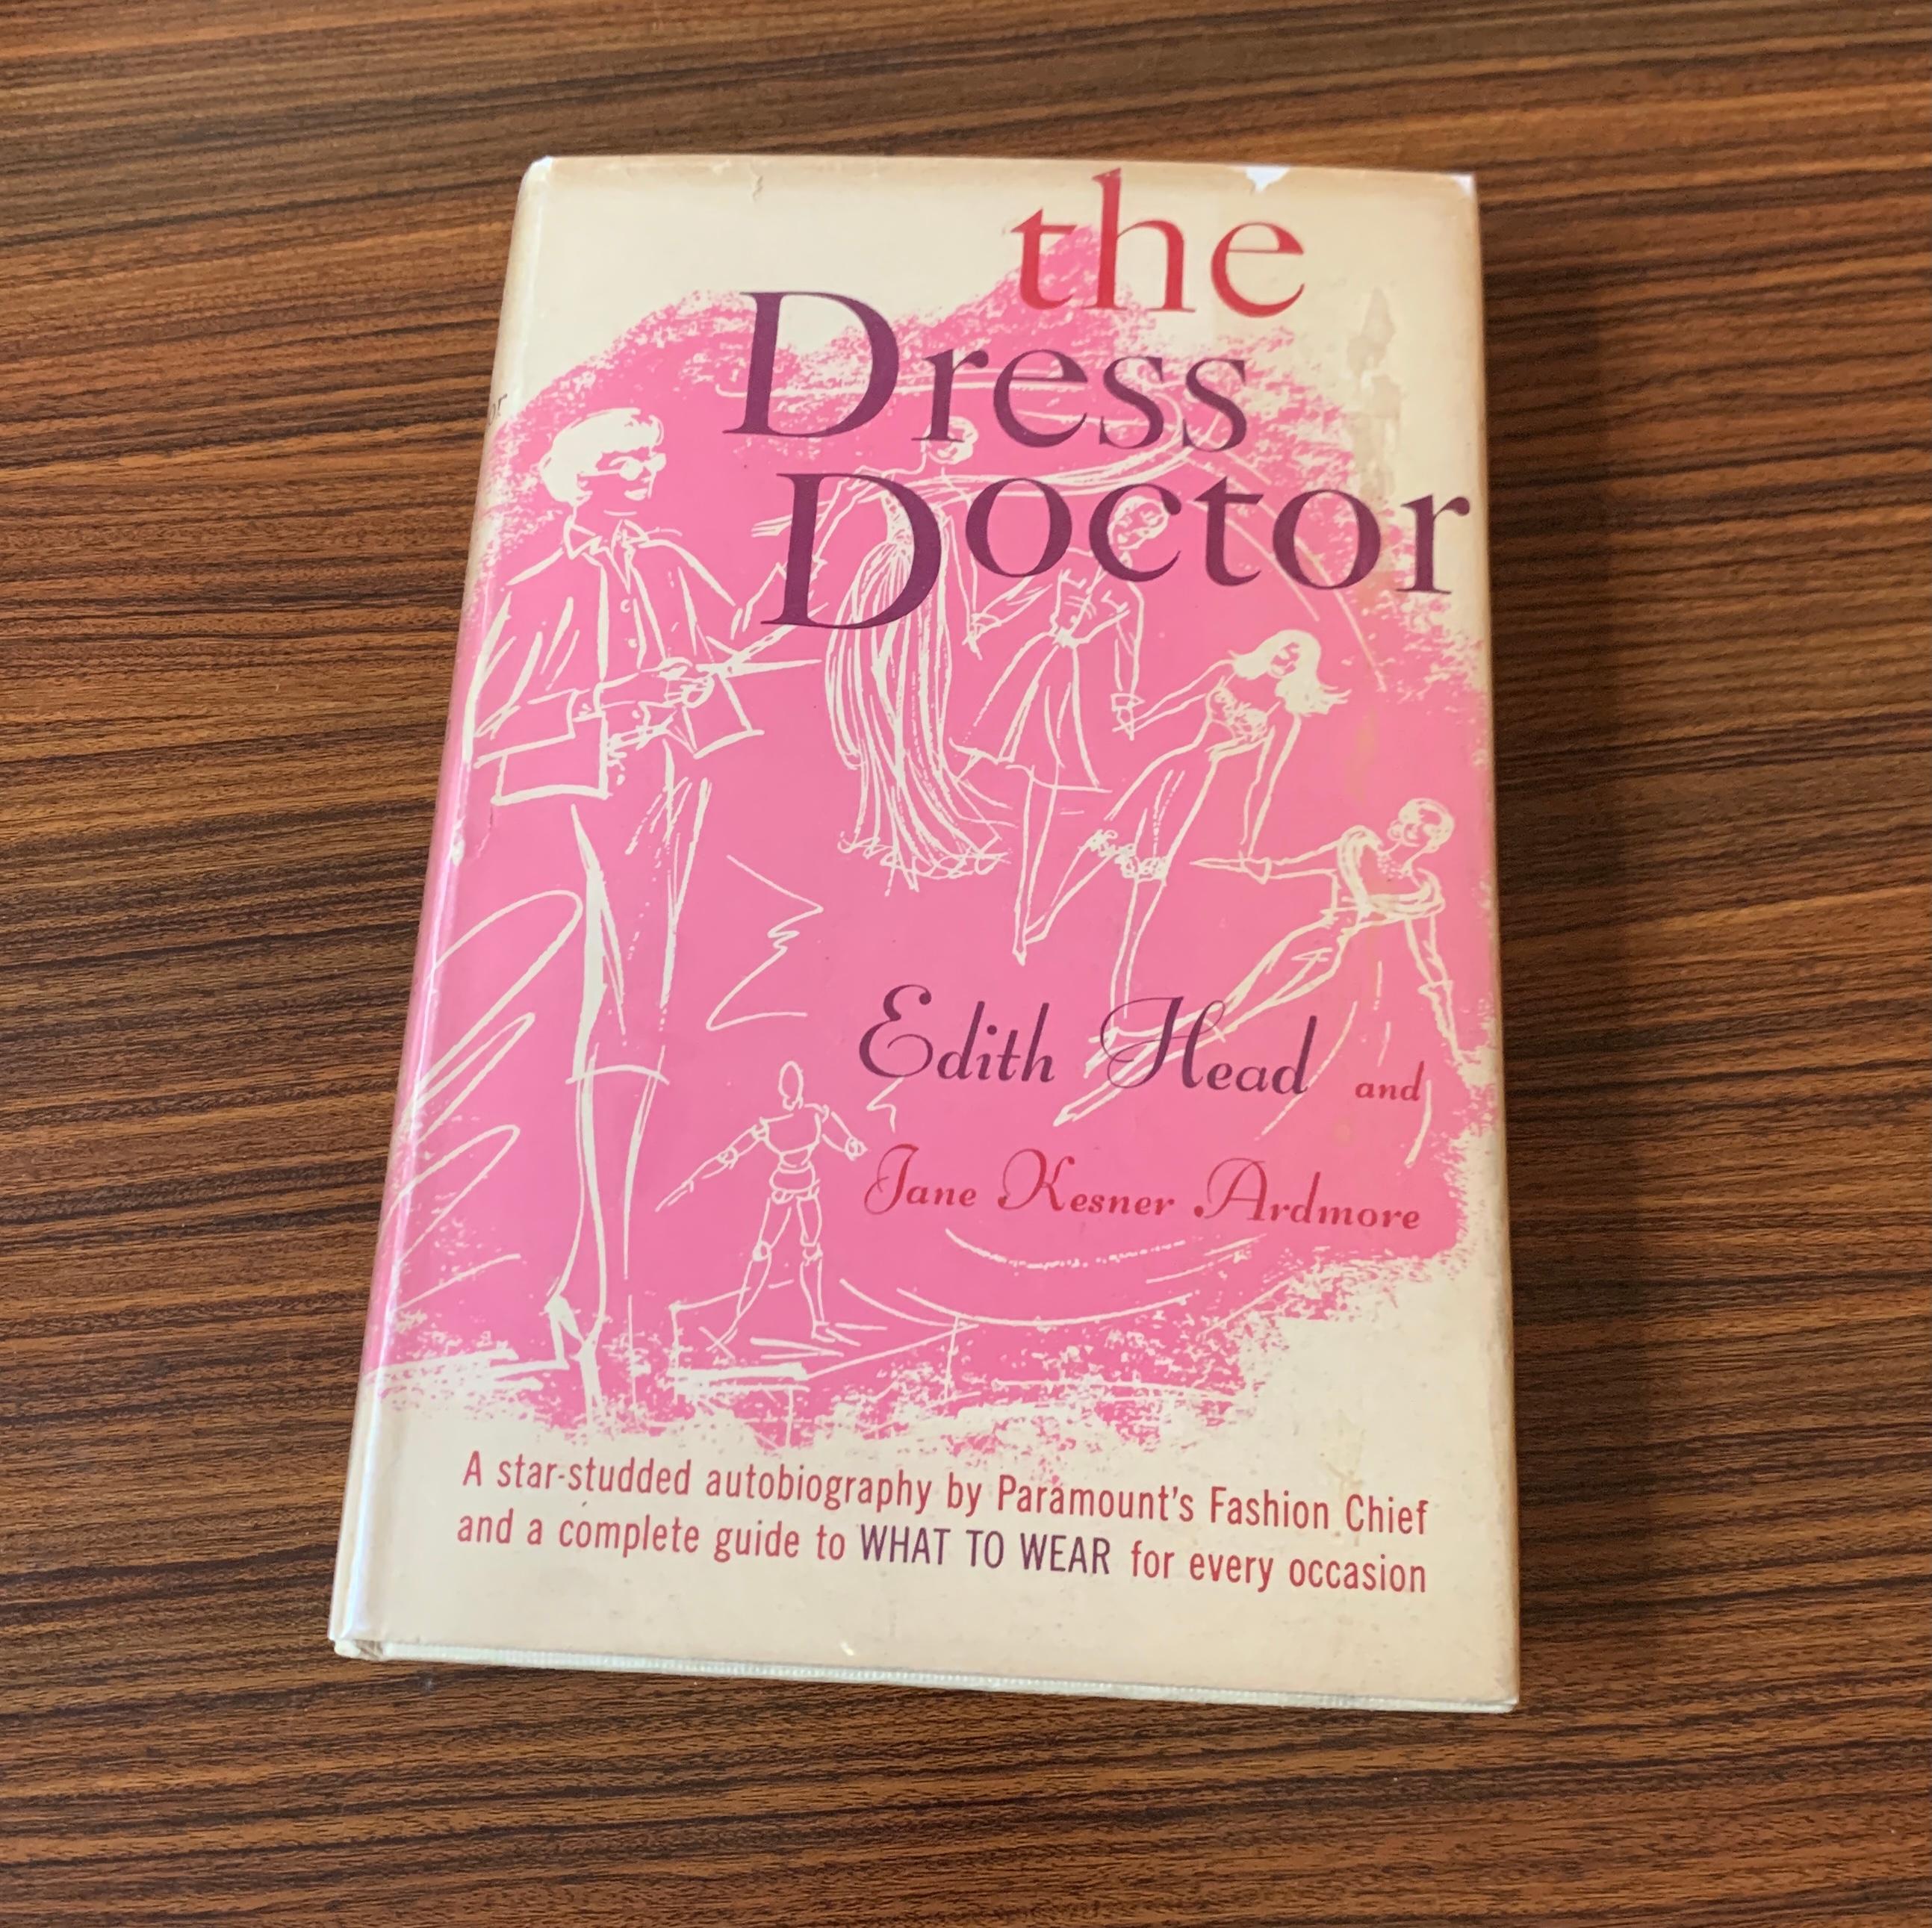 Hardcover first edition copy of The Dress Doctor by award winning and legendary costume designer Edith Head and Jane Kesner Ardmore. Read about Edith's career path and experiences dressing stars like Marlene Dietrich, Ginger Rogers, Elizabeth Taylor